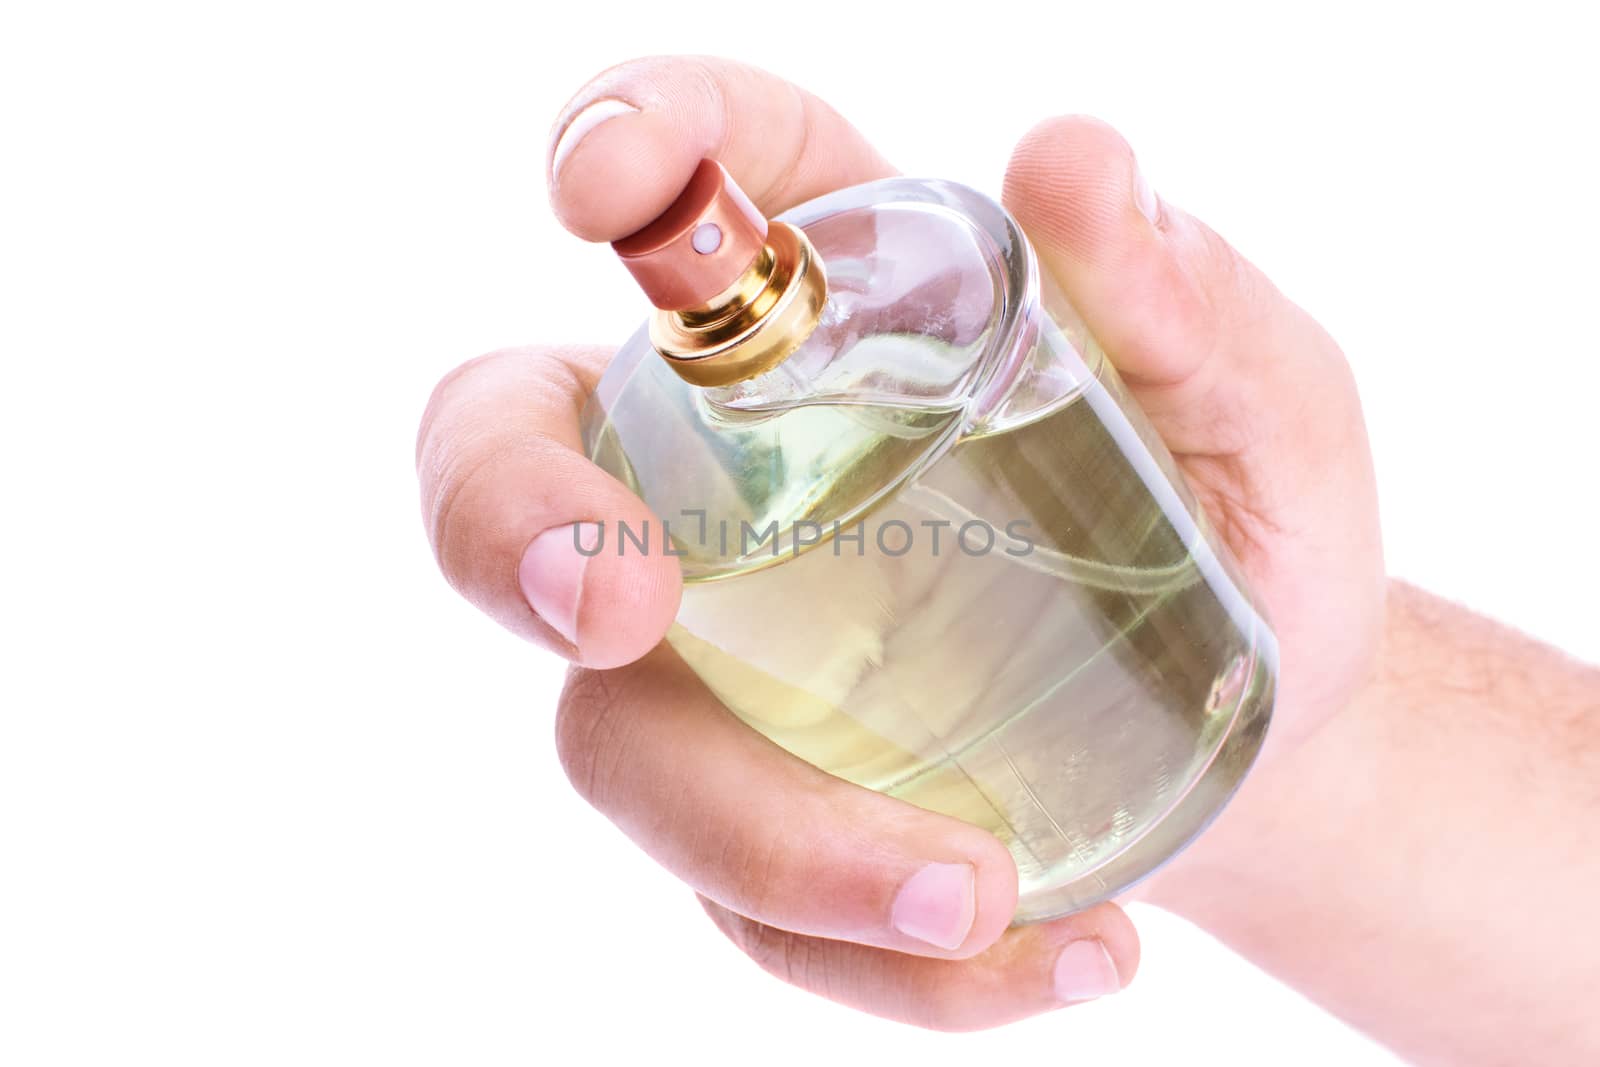 Human hand holding a perfume bottle by Mendelex